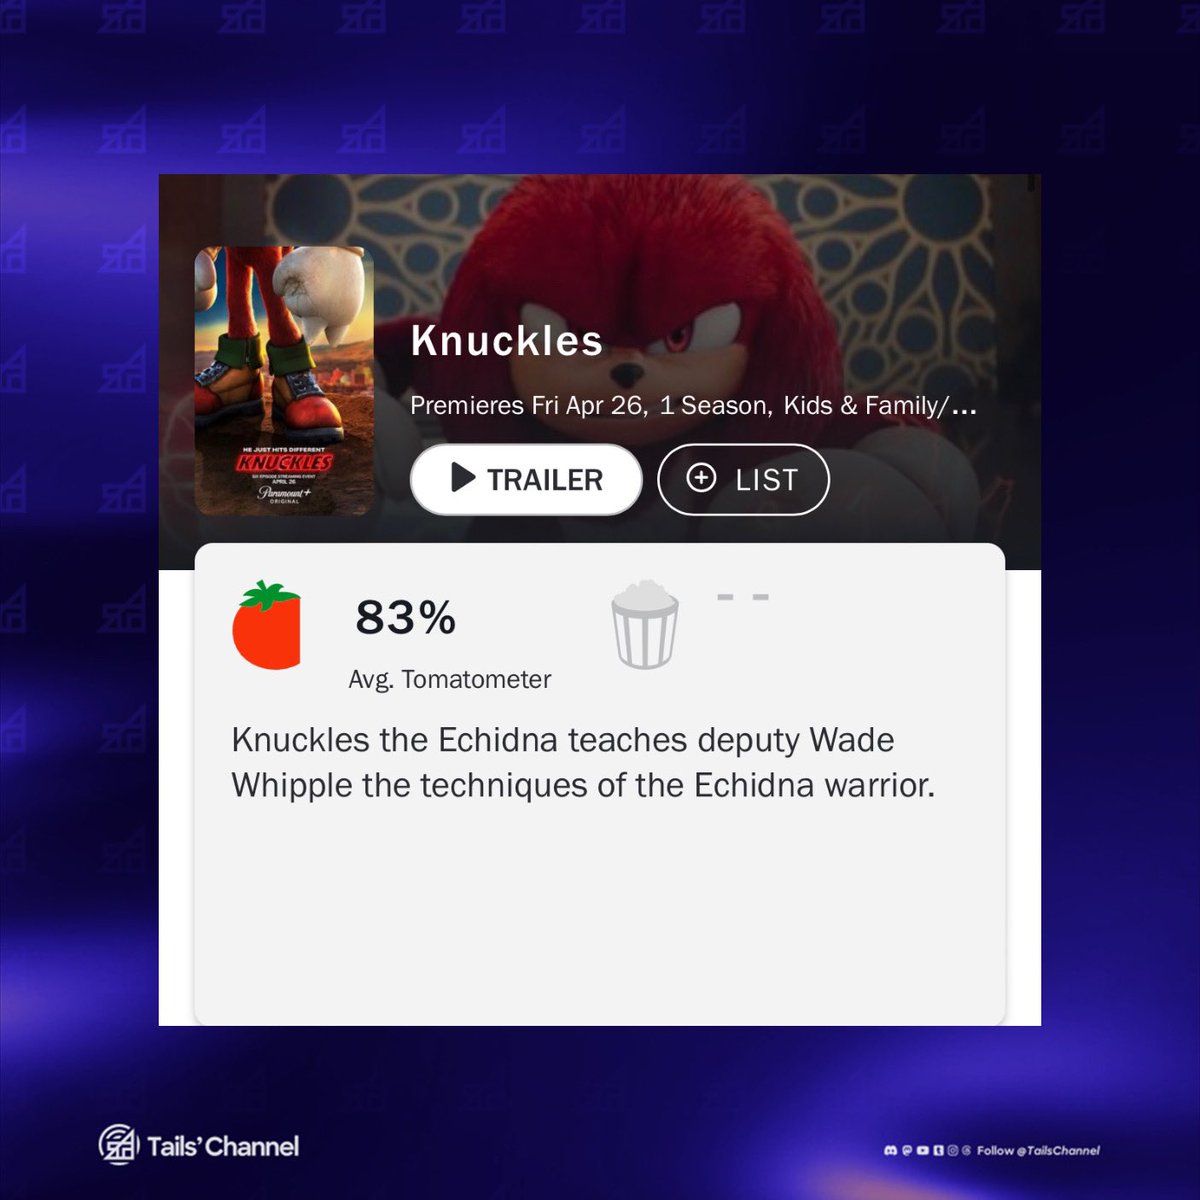 #Knuckles debuts with 83% on Rotten Tomatoes! #SonicNews